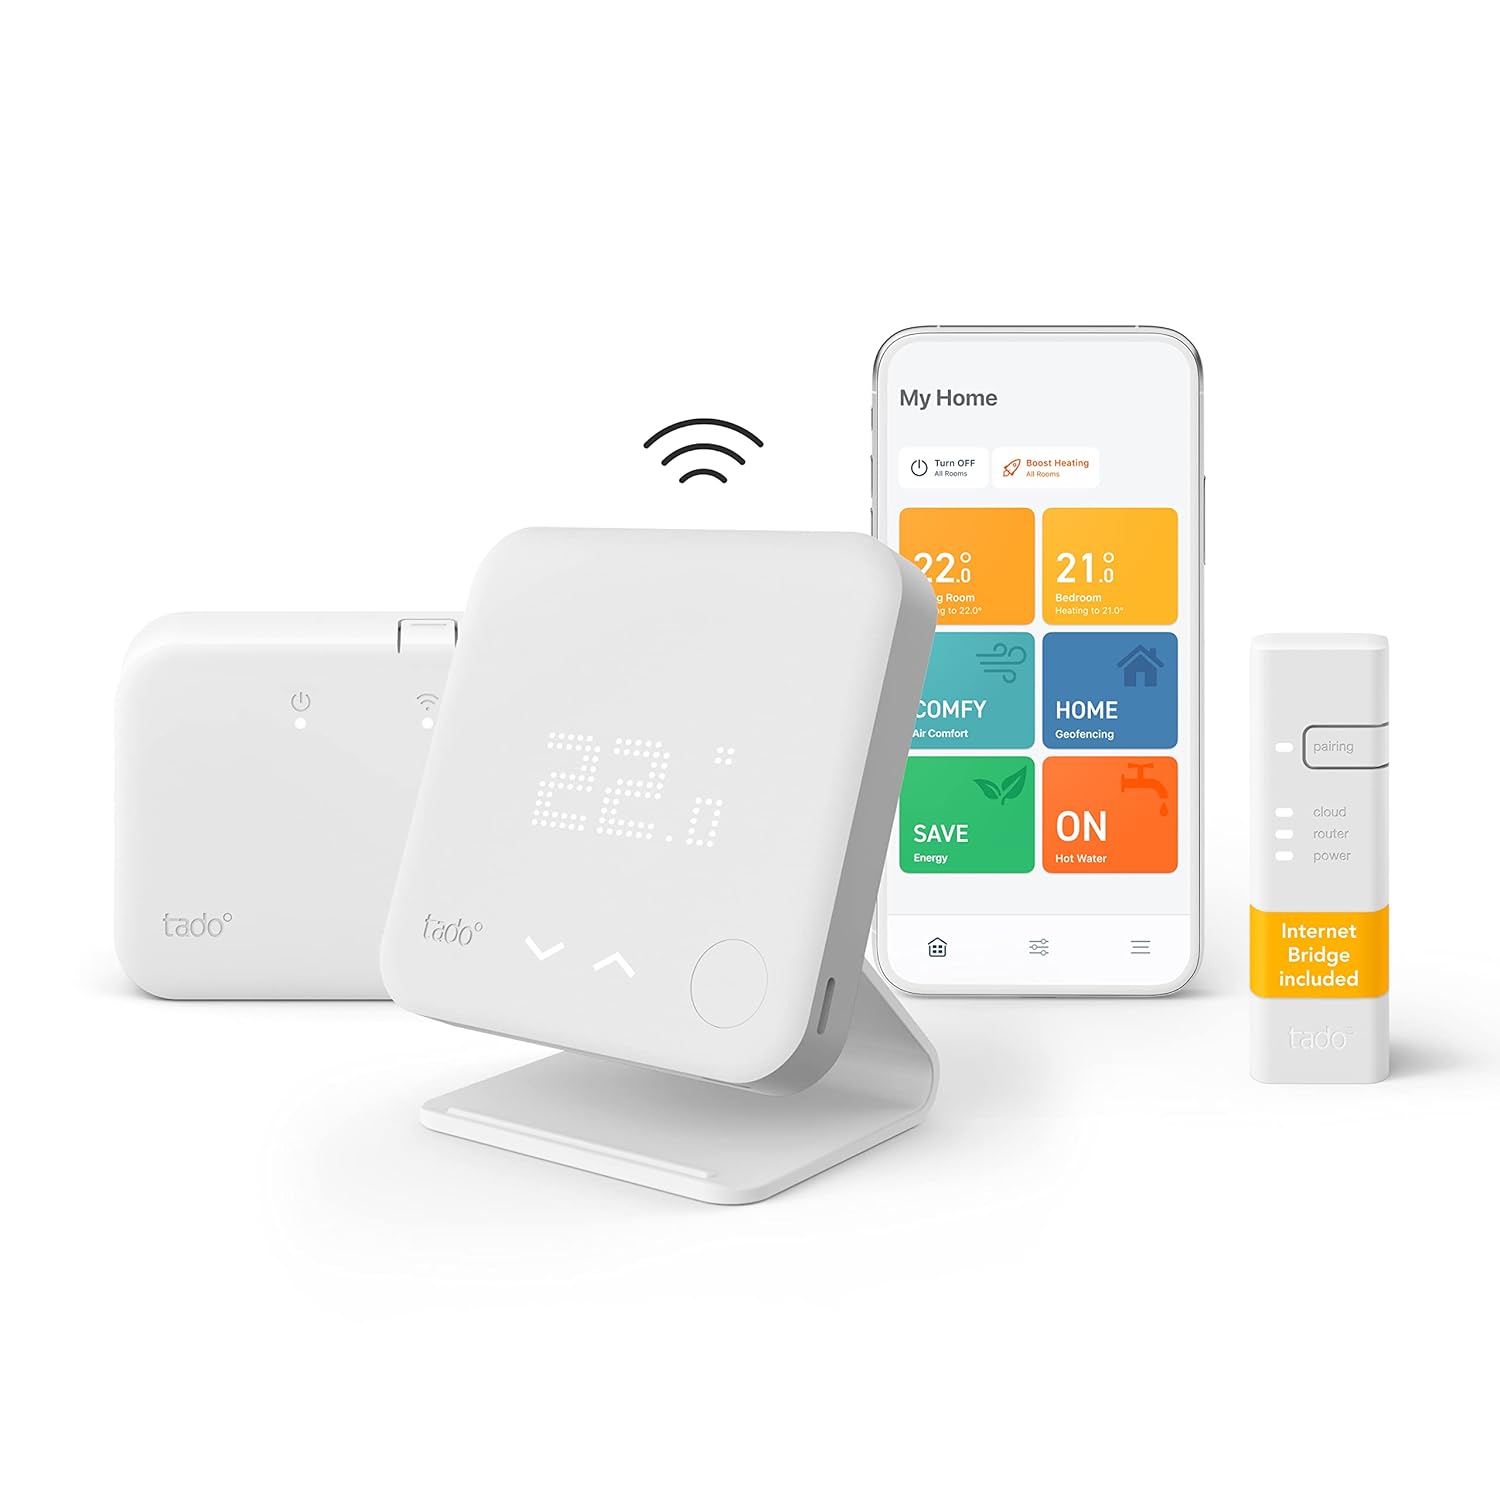 tado° Wireless Smart Thermostat Starter Kit V3+ Incl. Stand – Full Control Over Your Boiler And Hot Water From Anywhere, Save Energy, Easy DIY Installation - Works With Amazon Alexa, Siri, and Google - Amazing Gadgets Outlet